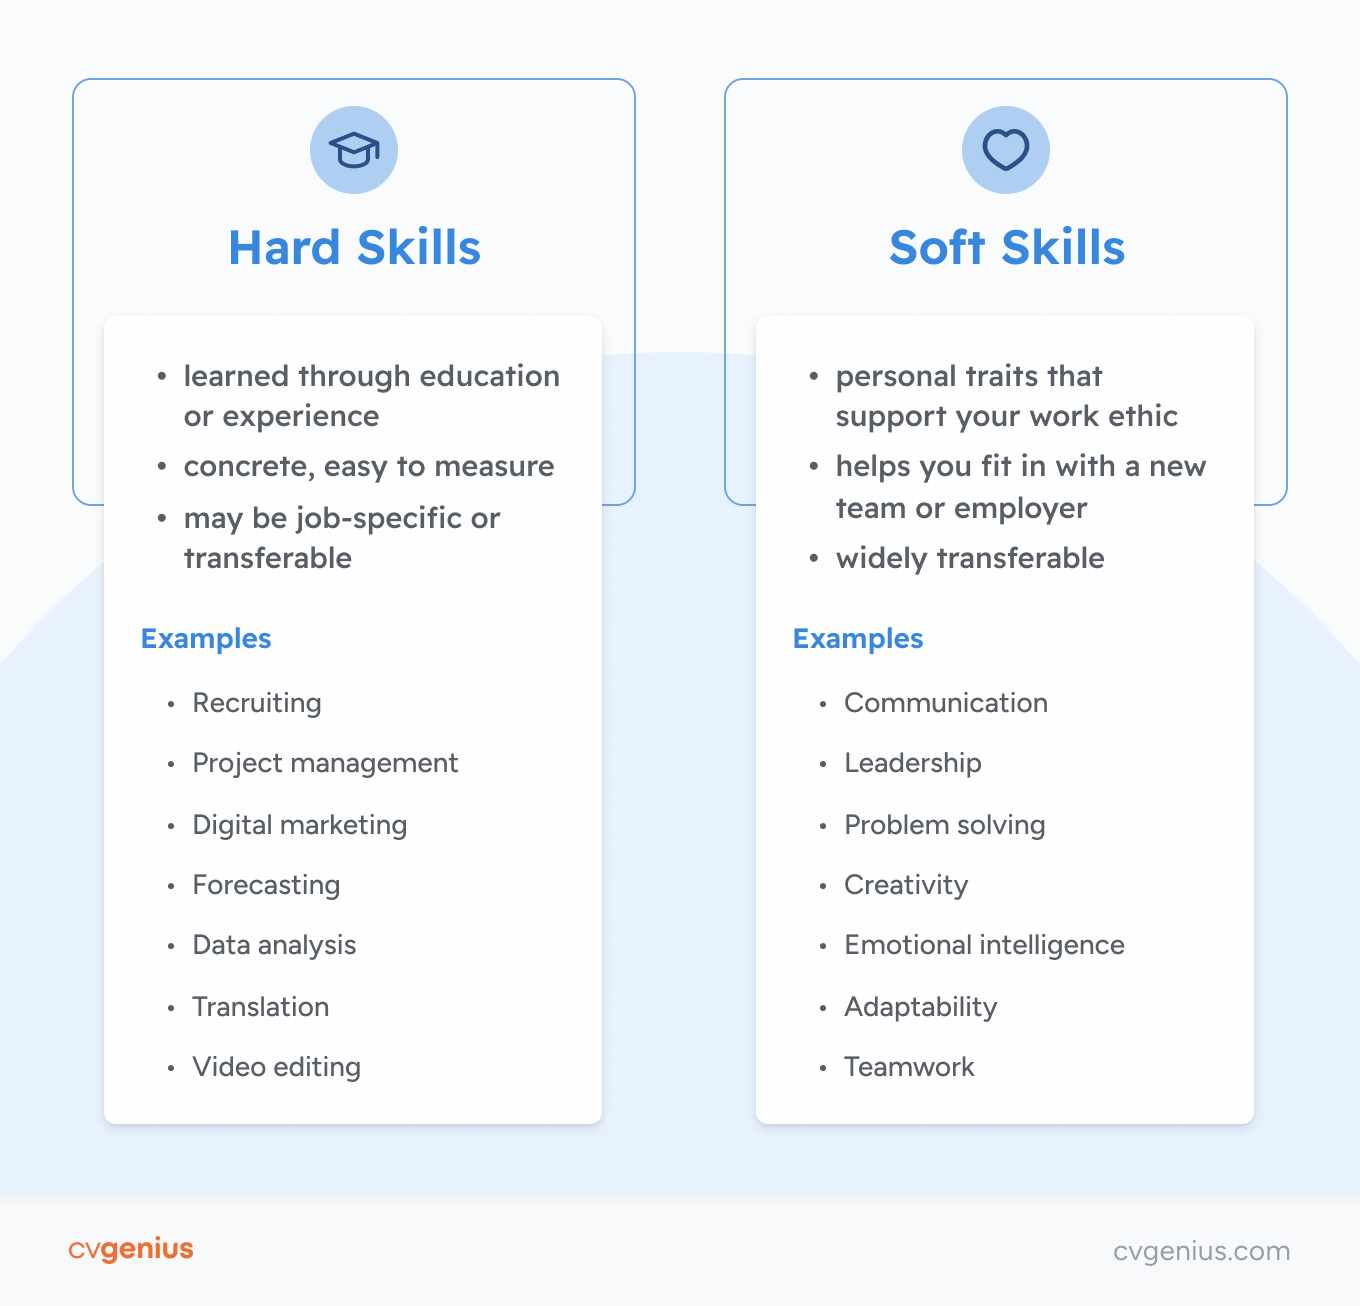 An infographic showing the differences between hard and soft skills, followed by a list of examples from each skill type and some tips for showing them on your CV.